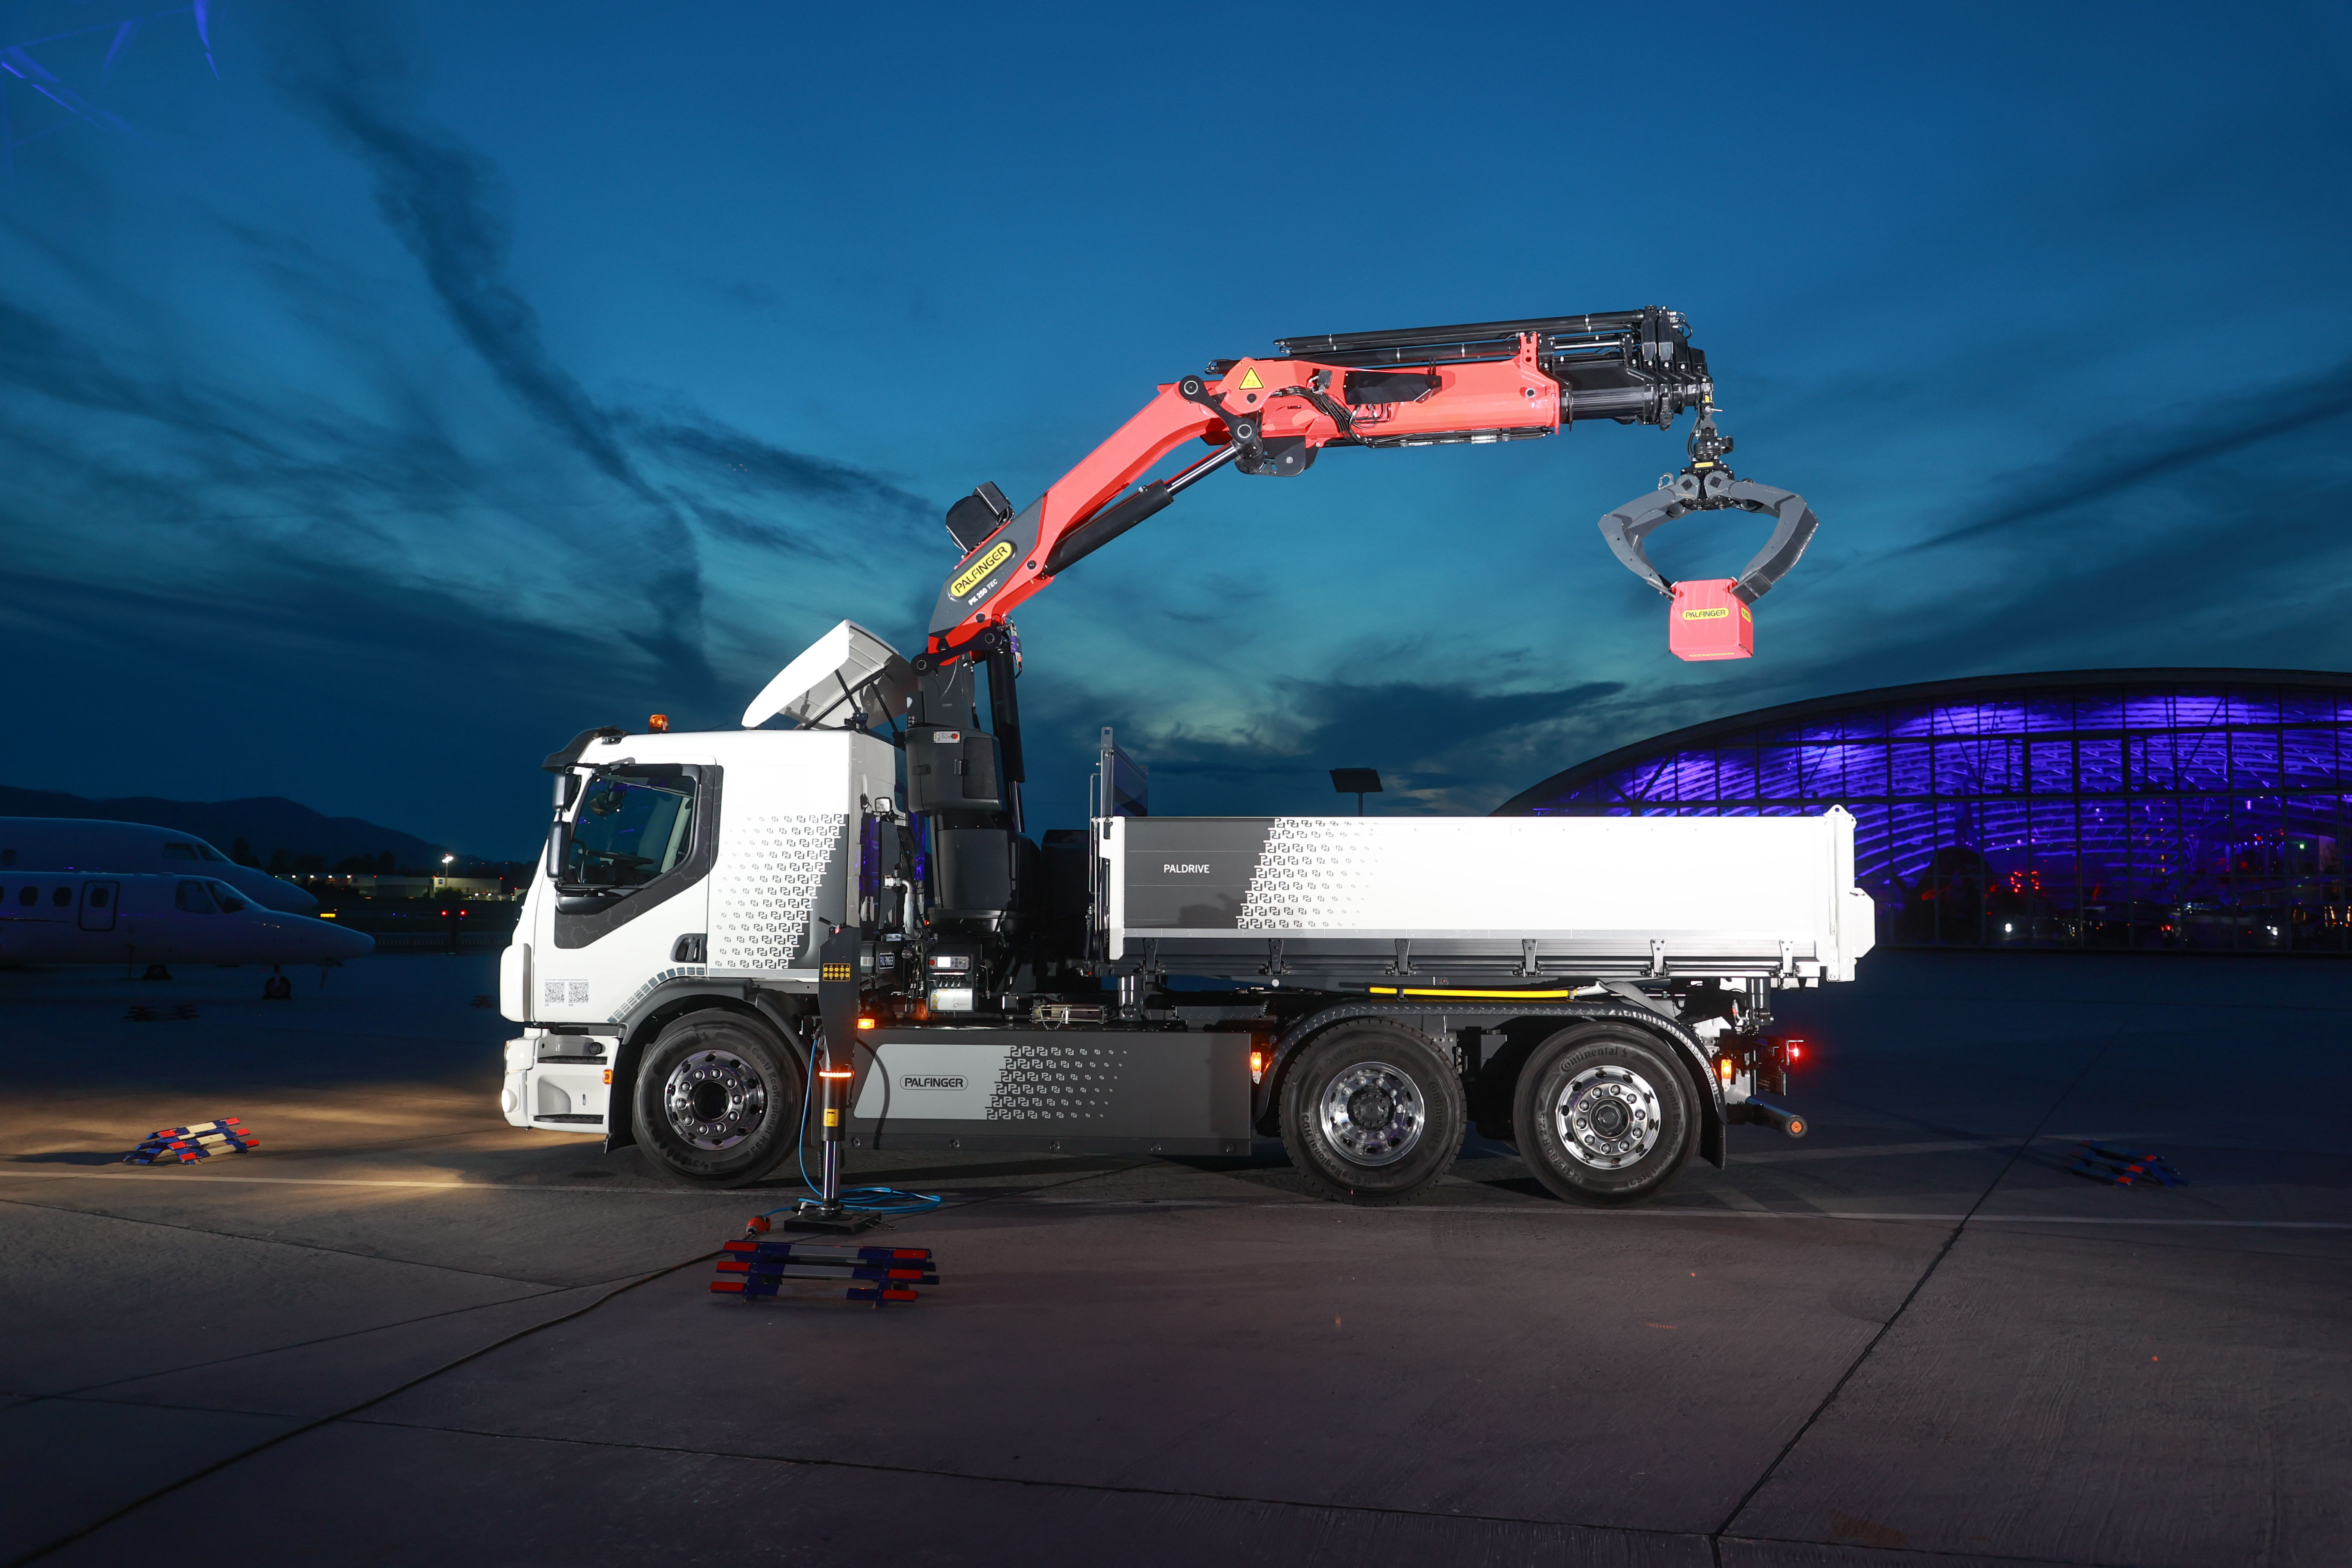 The new PALFINGER TEC cranes are the technological spearhead of the world's leading manufacturer and provider of innovative crane and lifting solutions.